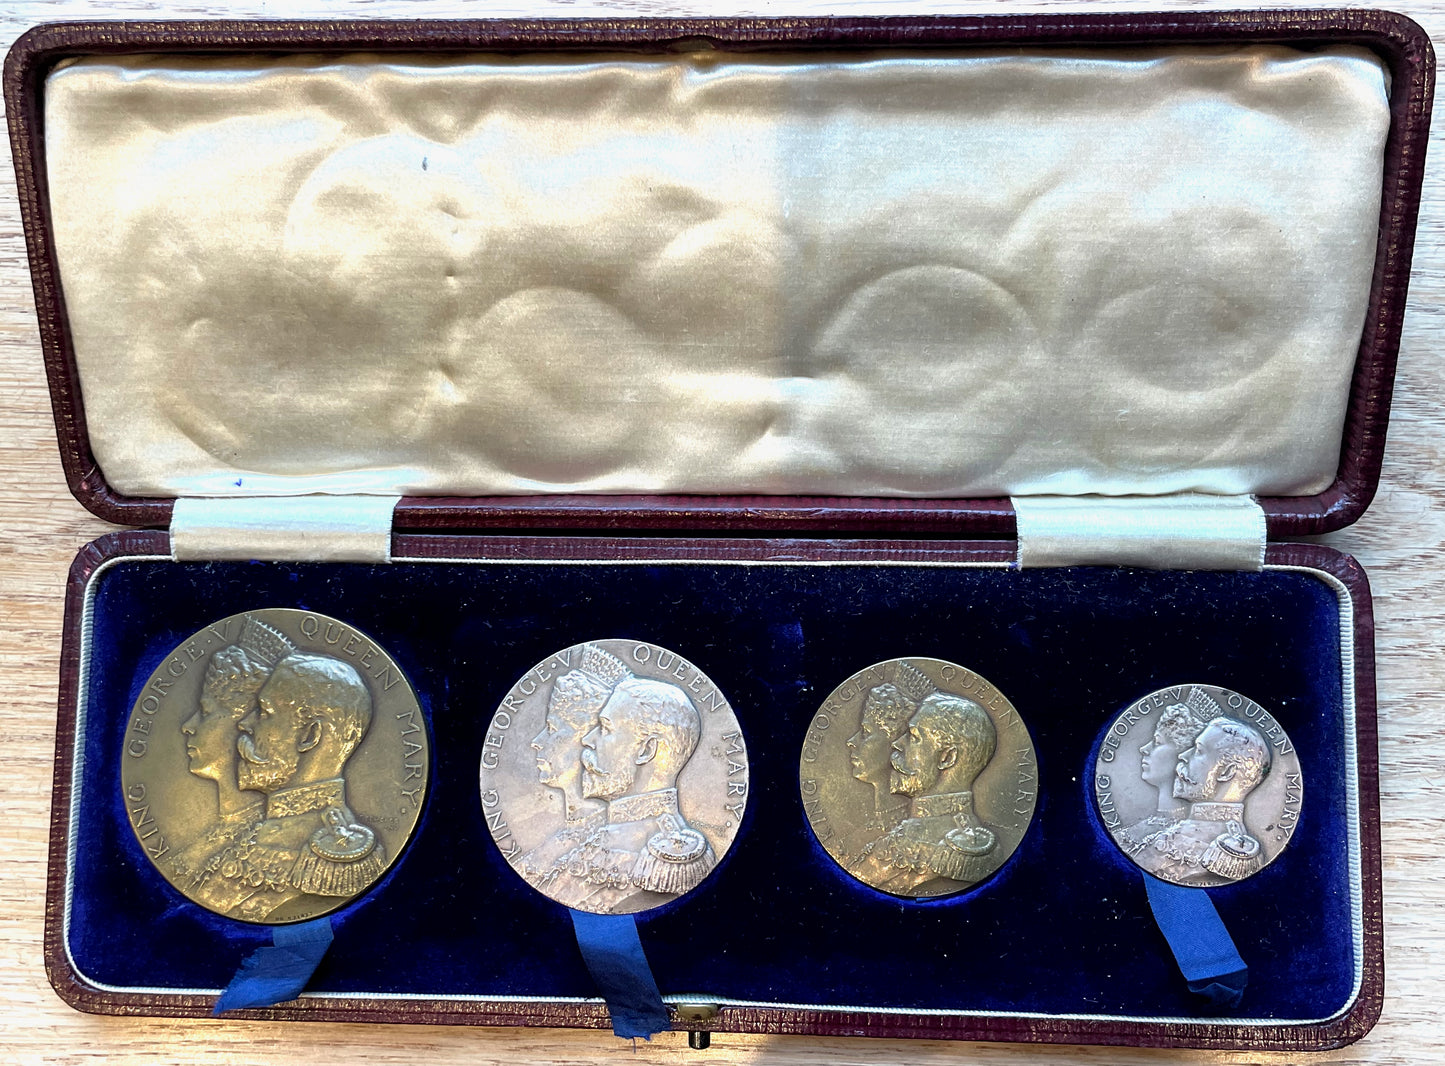 1911 Coronation cased set of four medals bronze and silver BHM 4056 Extremely Rare UNC